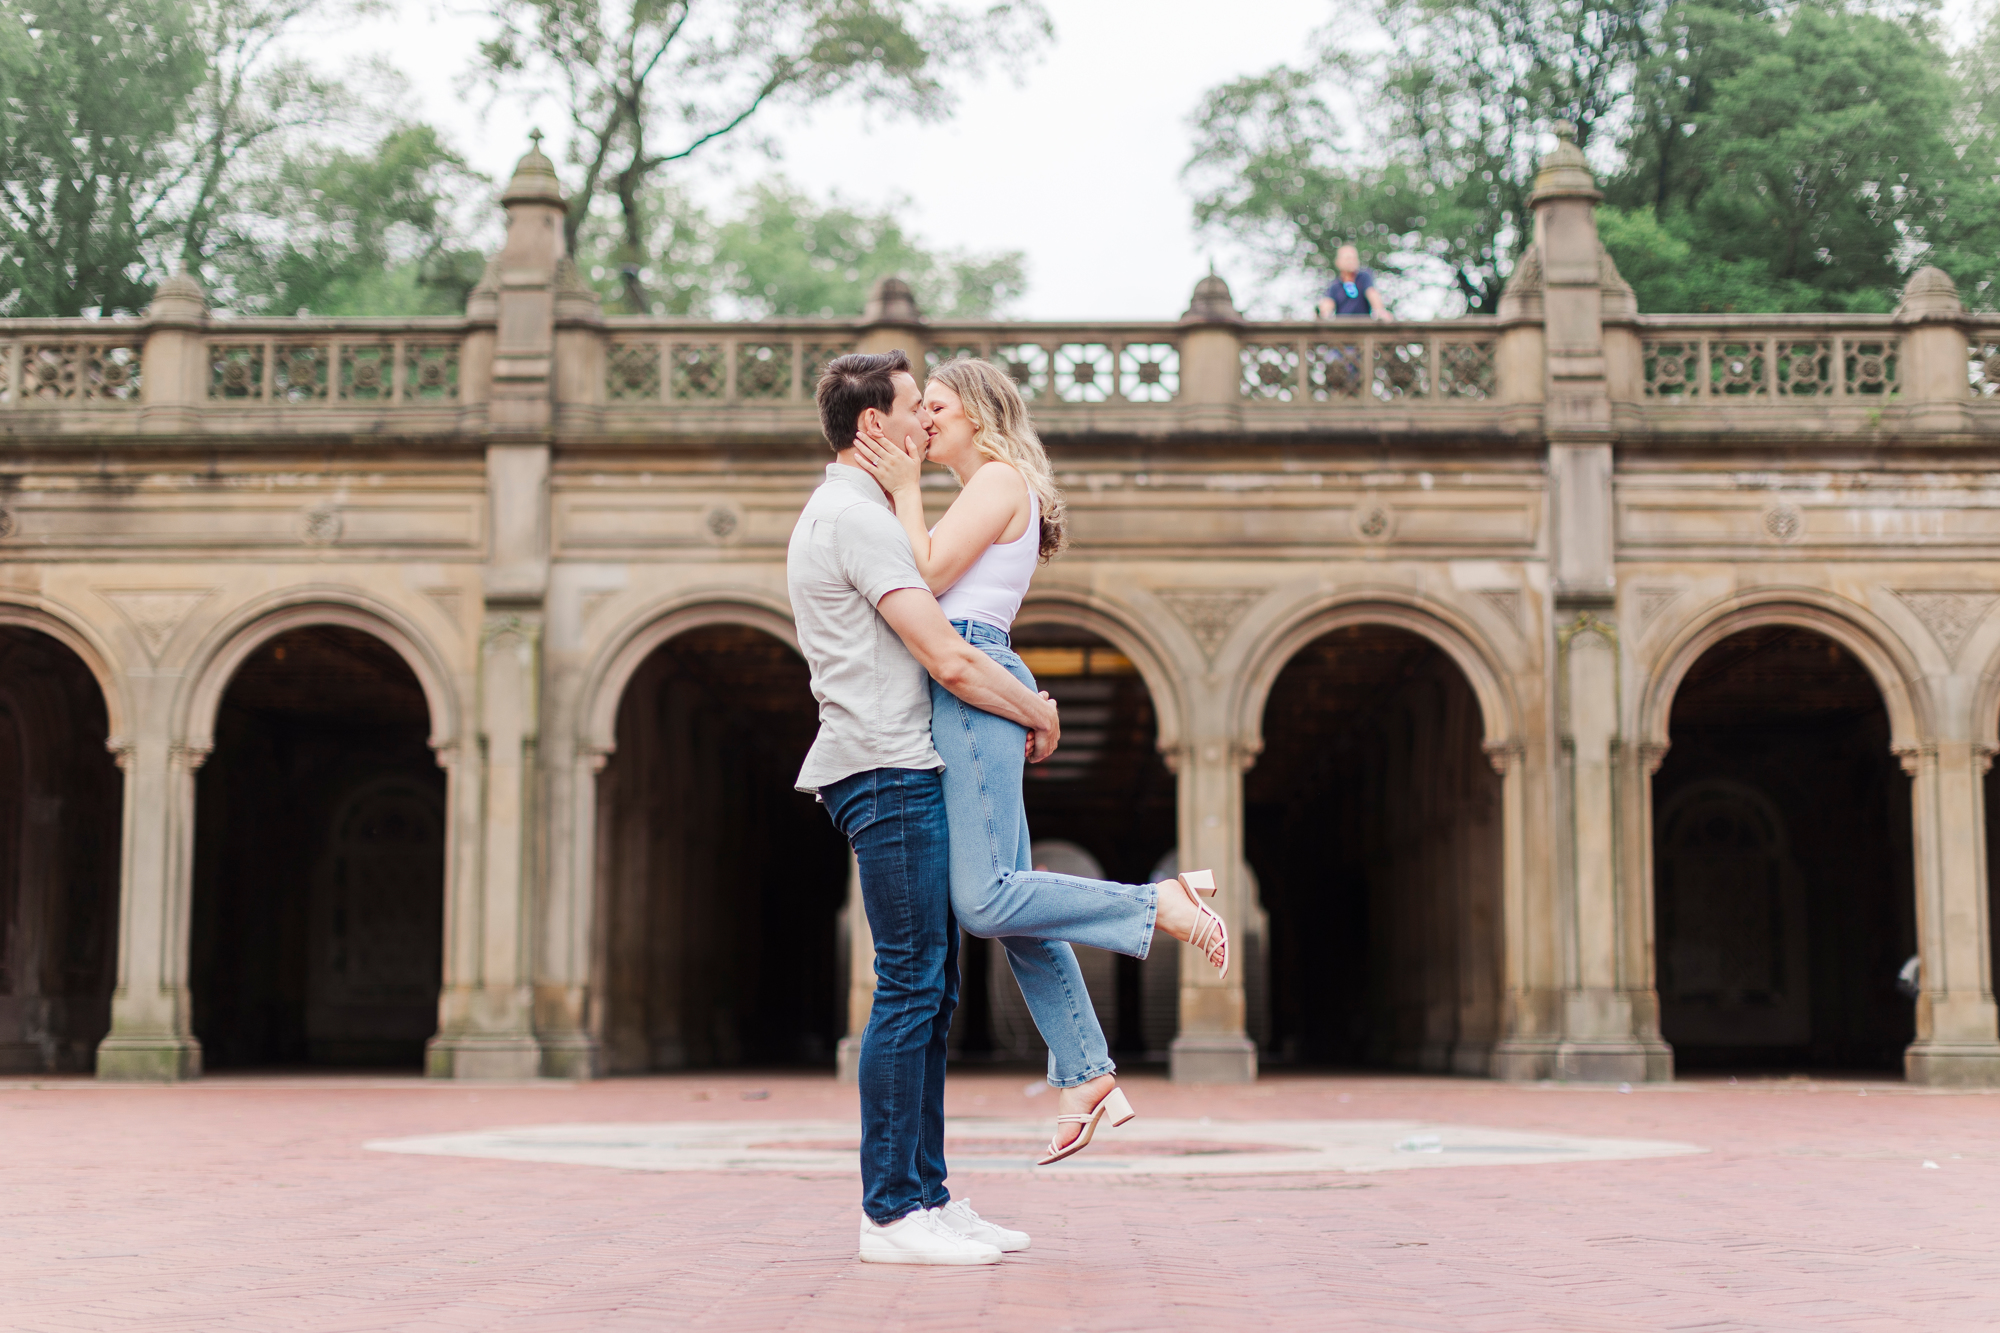 Cheerful Central Park Engagement Session